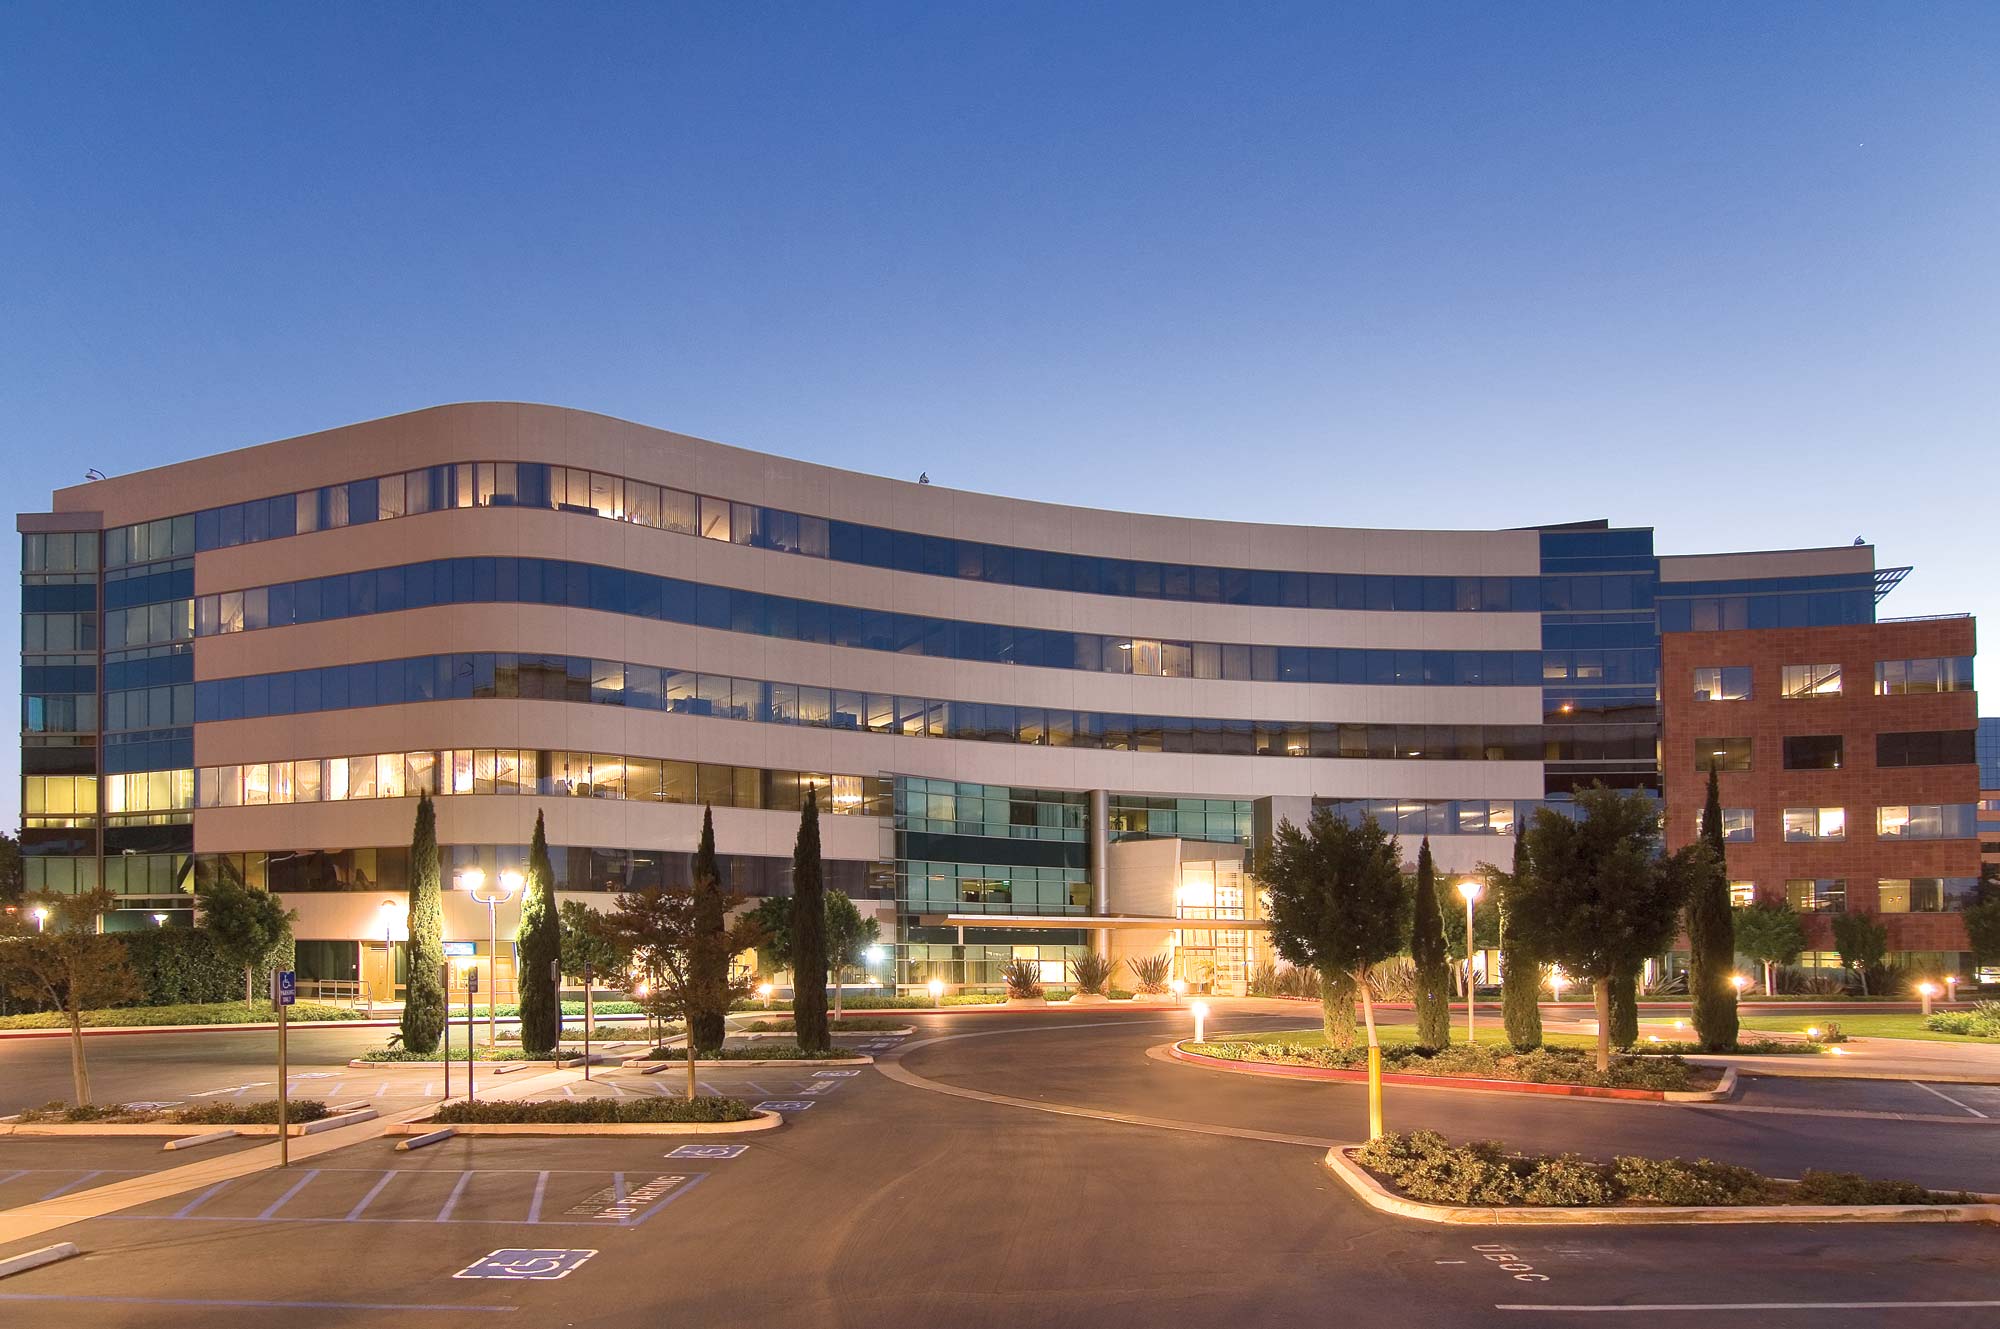  ​One of Mission Valley’s premier office projects, Rio San Diego Plaza is a six-story 190,000 SF Class “A” building. Built in 2001, Rio San Diego Plaza offers tenants a centrally located Mission Valley address, with immediate access to an abundant am